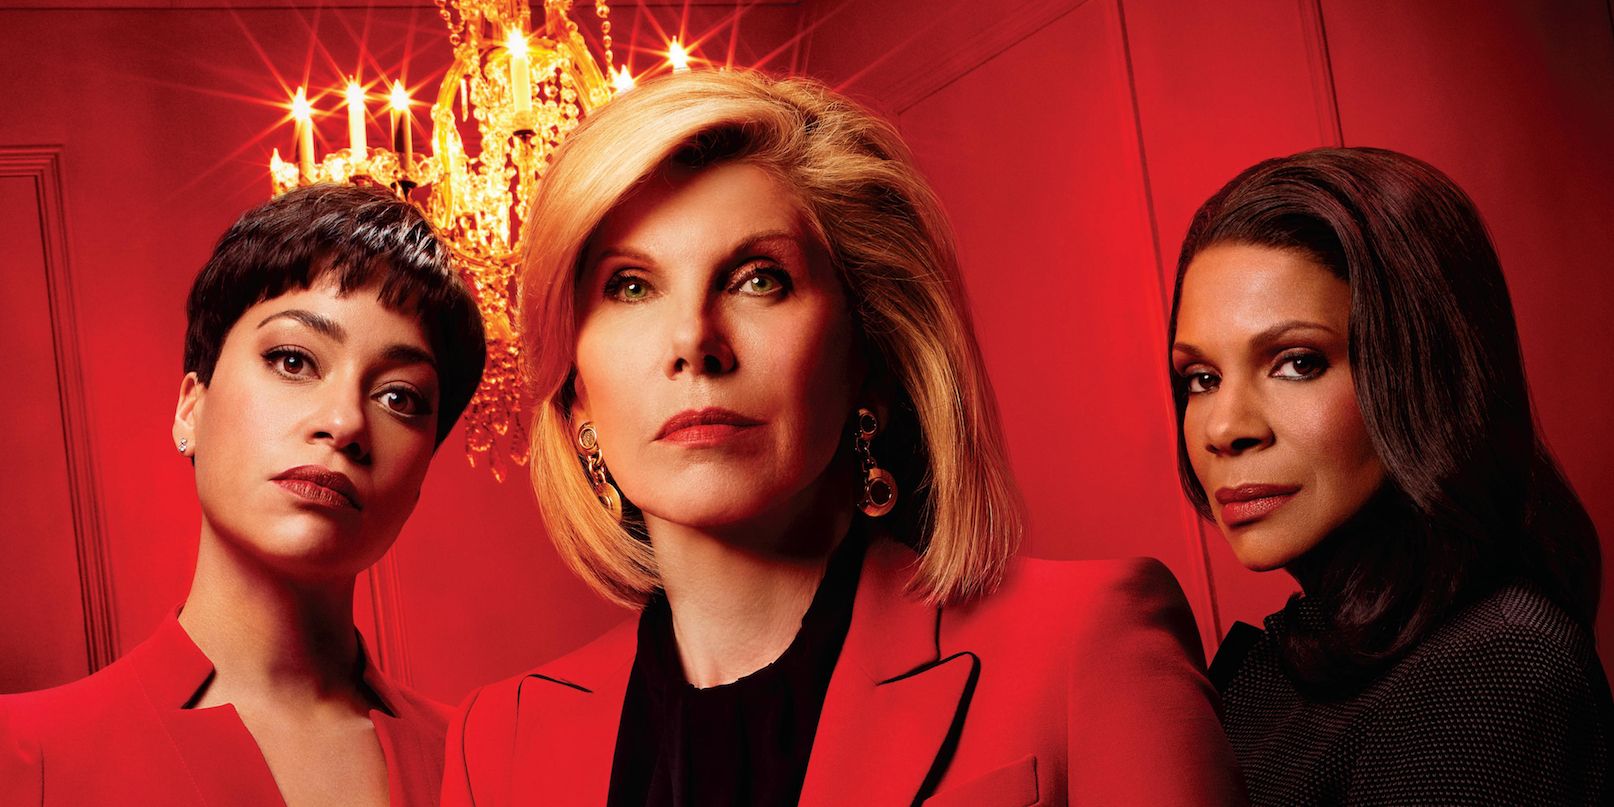 Characters from The Good Fight.